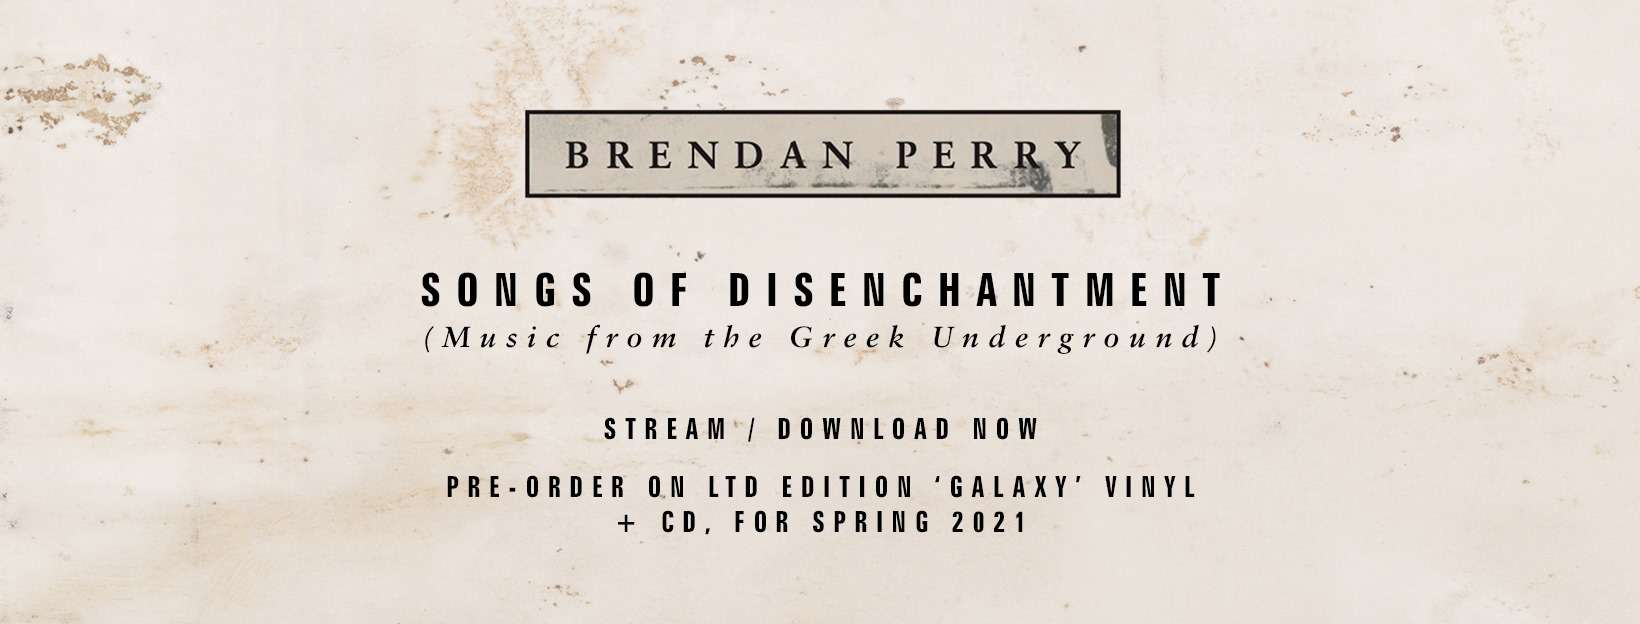 Brendan Perry - Song of Disenchant (Music from the Greek Underground). 